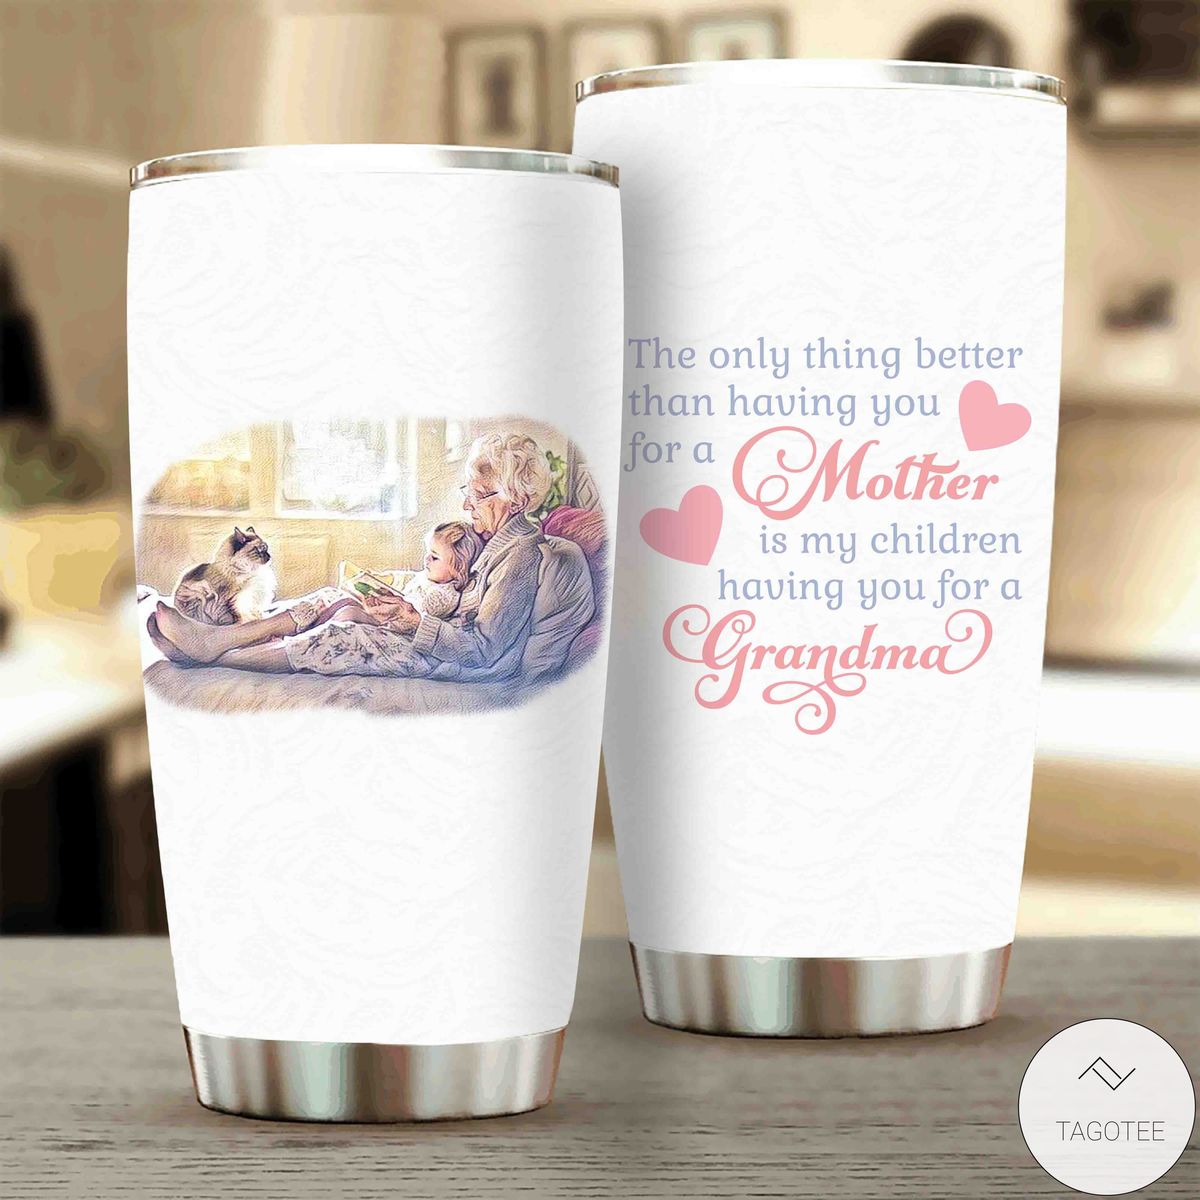 The-Only-Thing-Better-Than-Having-You-For-A-Mother-Is-My-Children-Having-You-For-A-Grandma-Tumbler